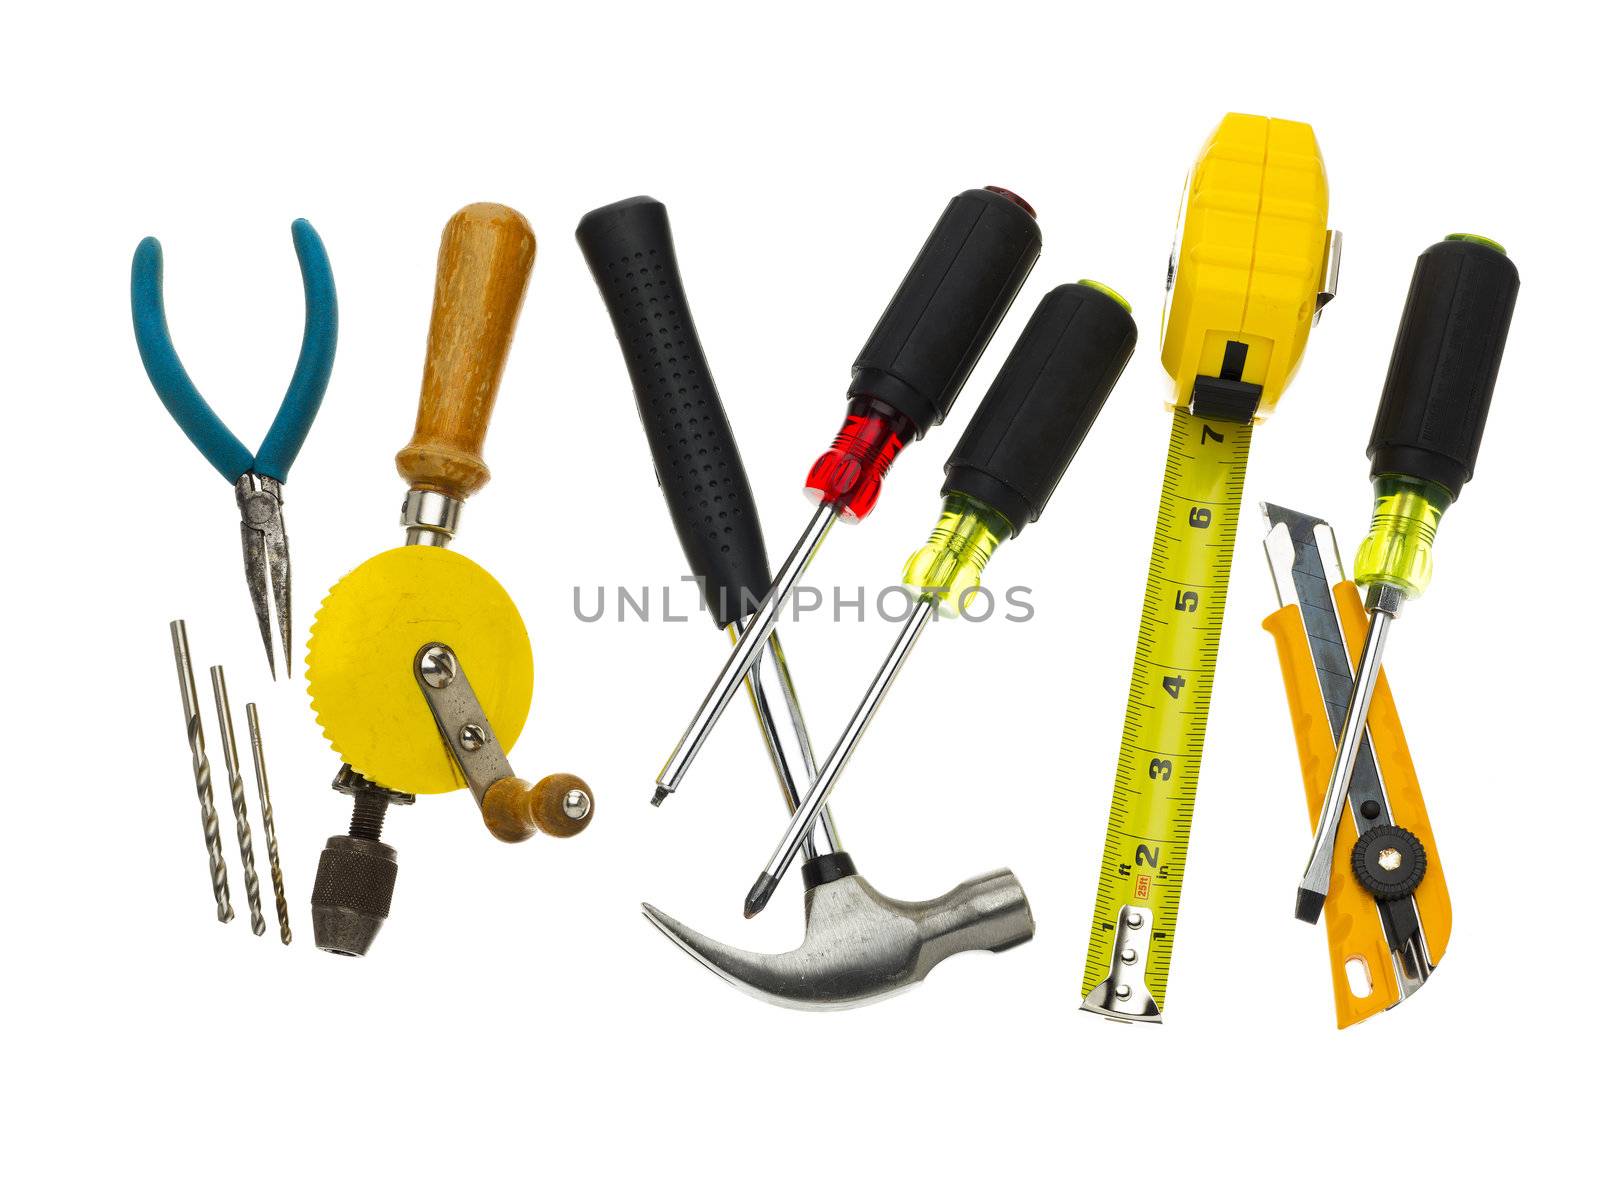 Many different hand tools placed on a white background